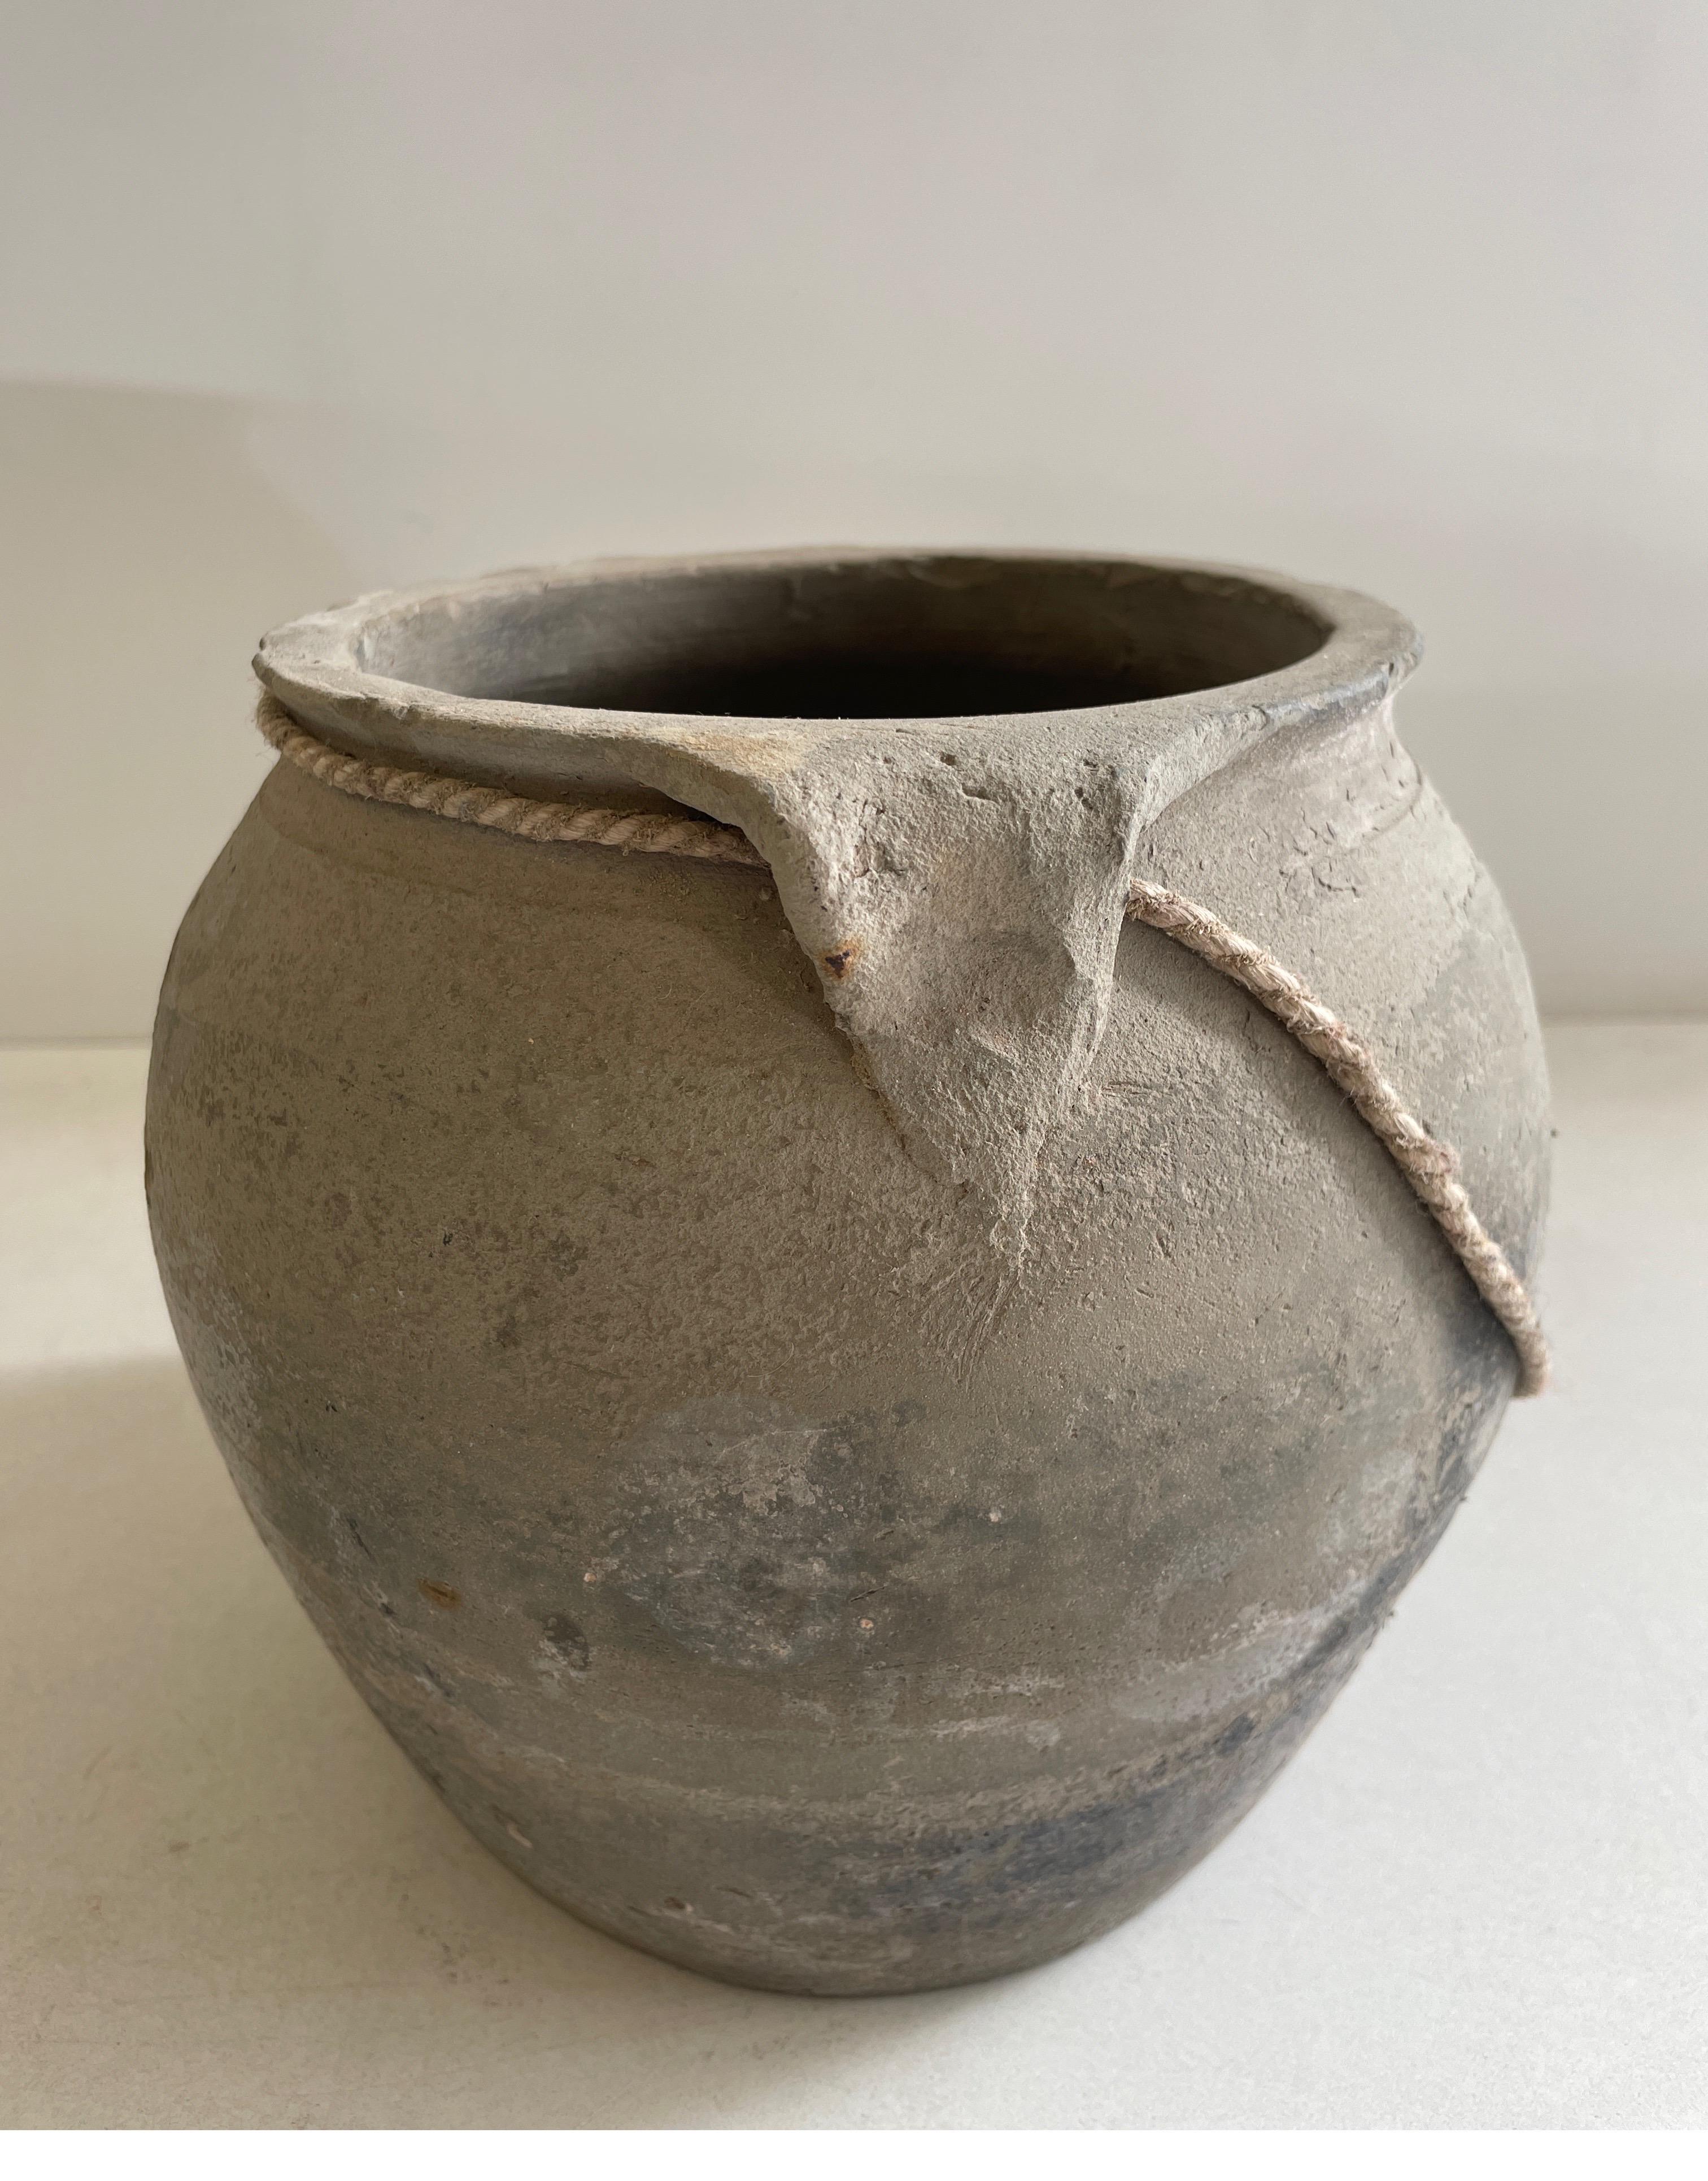 Vintage Matte oil pots Pottery beautifully rich in character, this vintage oil pot adds just the right amount of texture + warmth where you need it. Stunning matte finish with warm earthy gray, and mixed tones. Each piece is uniquely special with